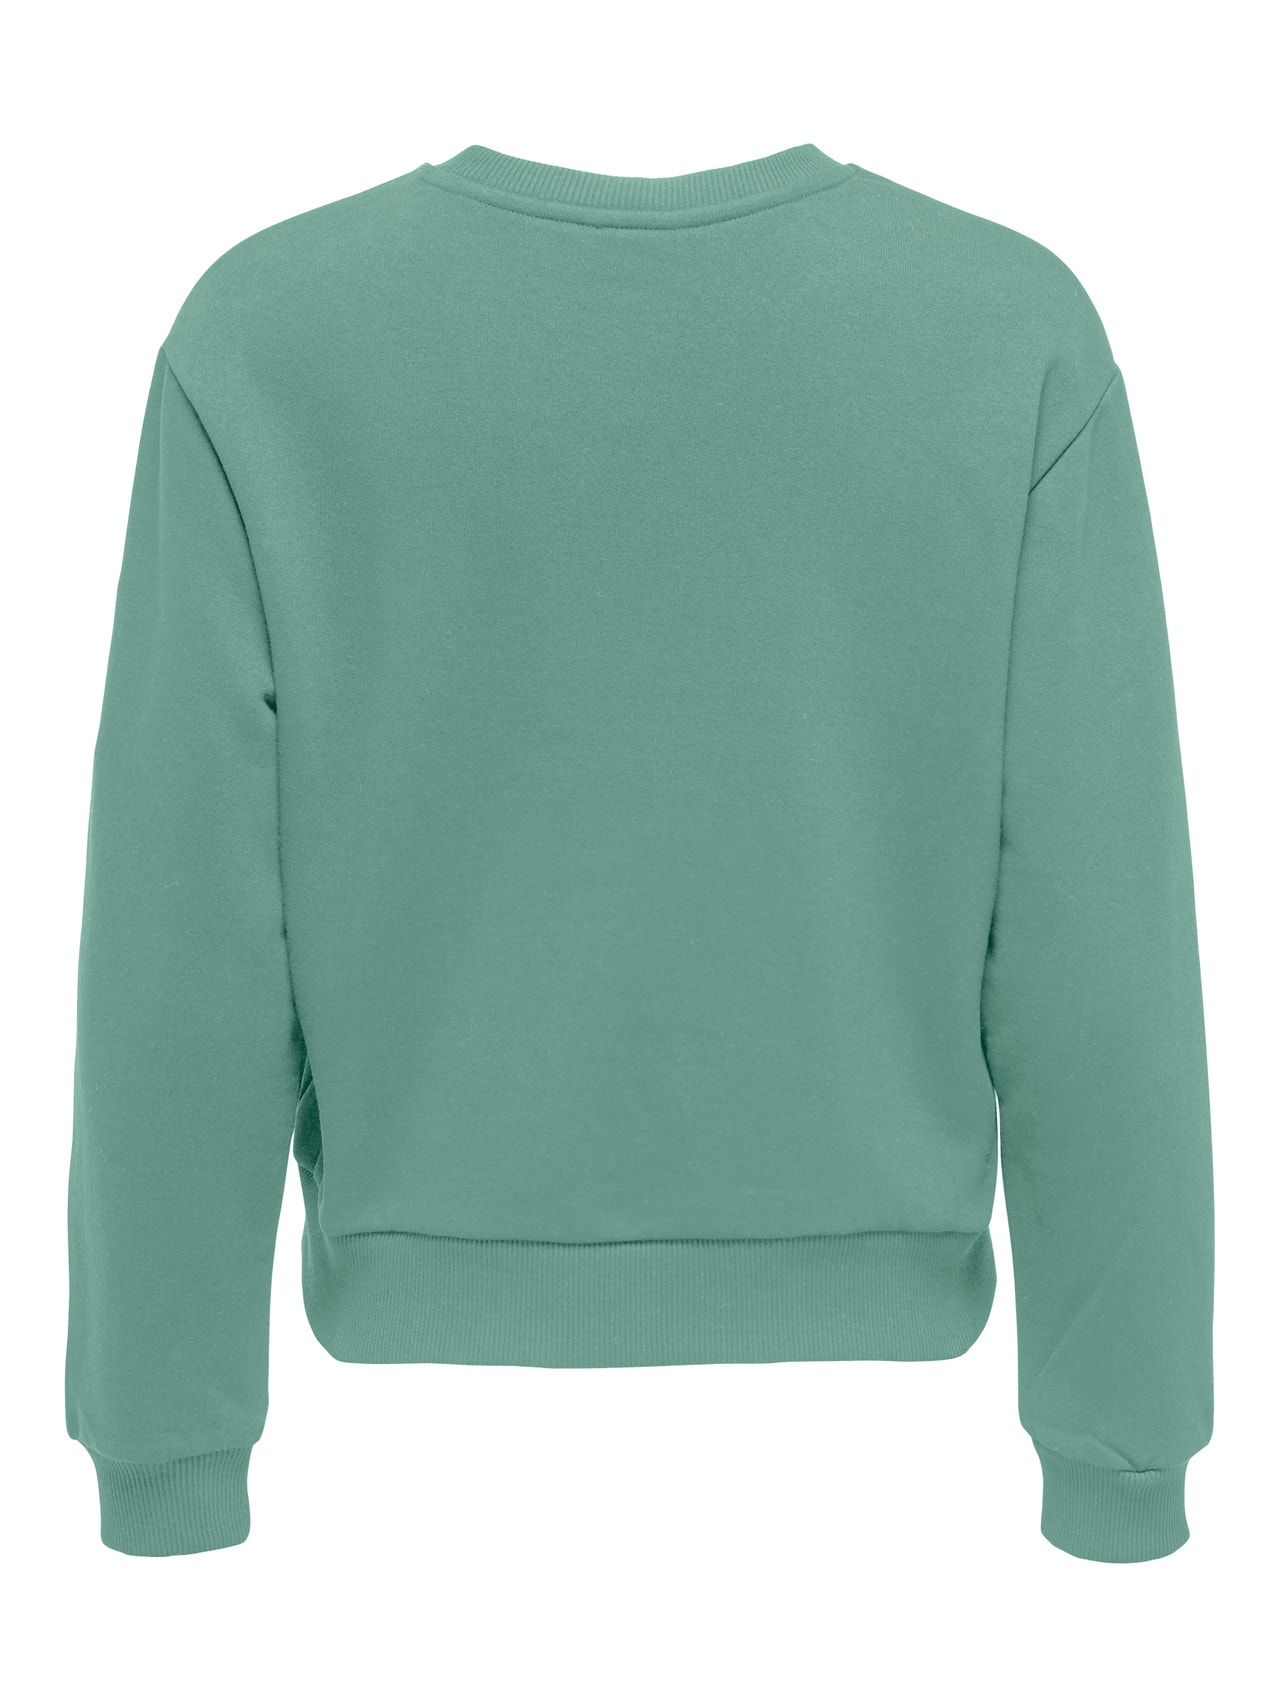 ONLY Sweat-shirts Regular Fit Col rond -Creme De Menthe - 15289279